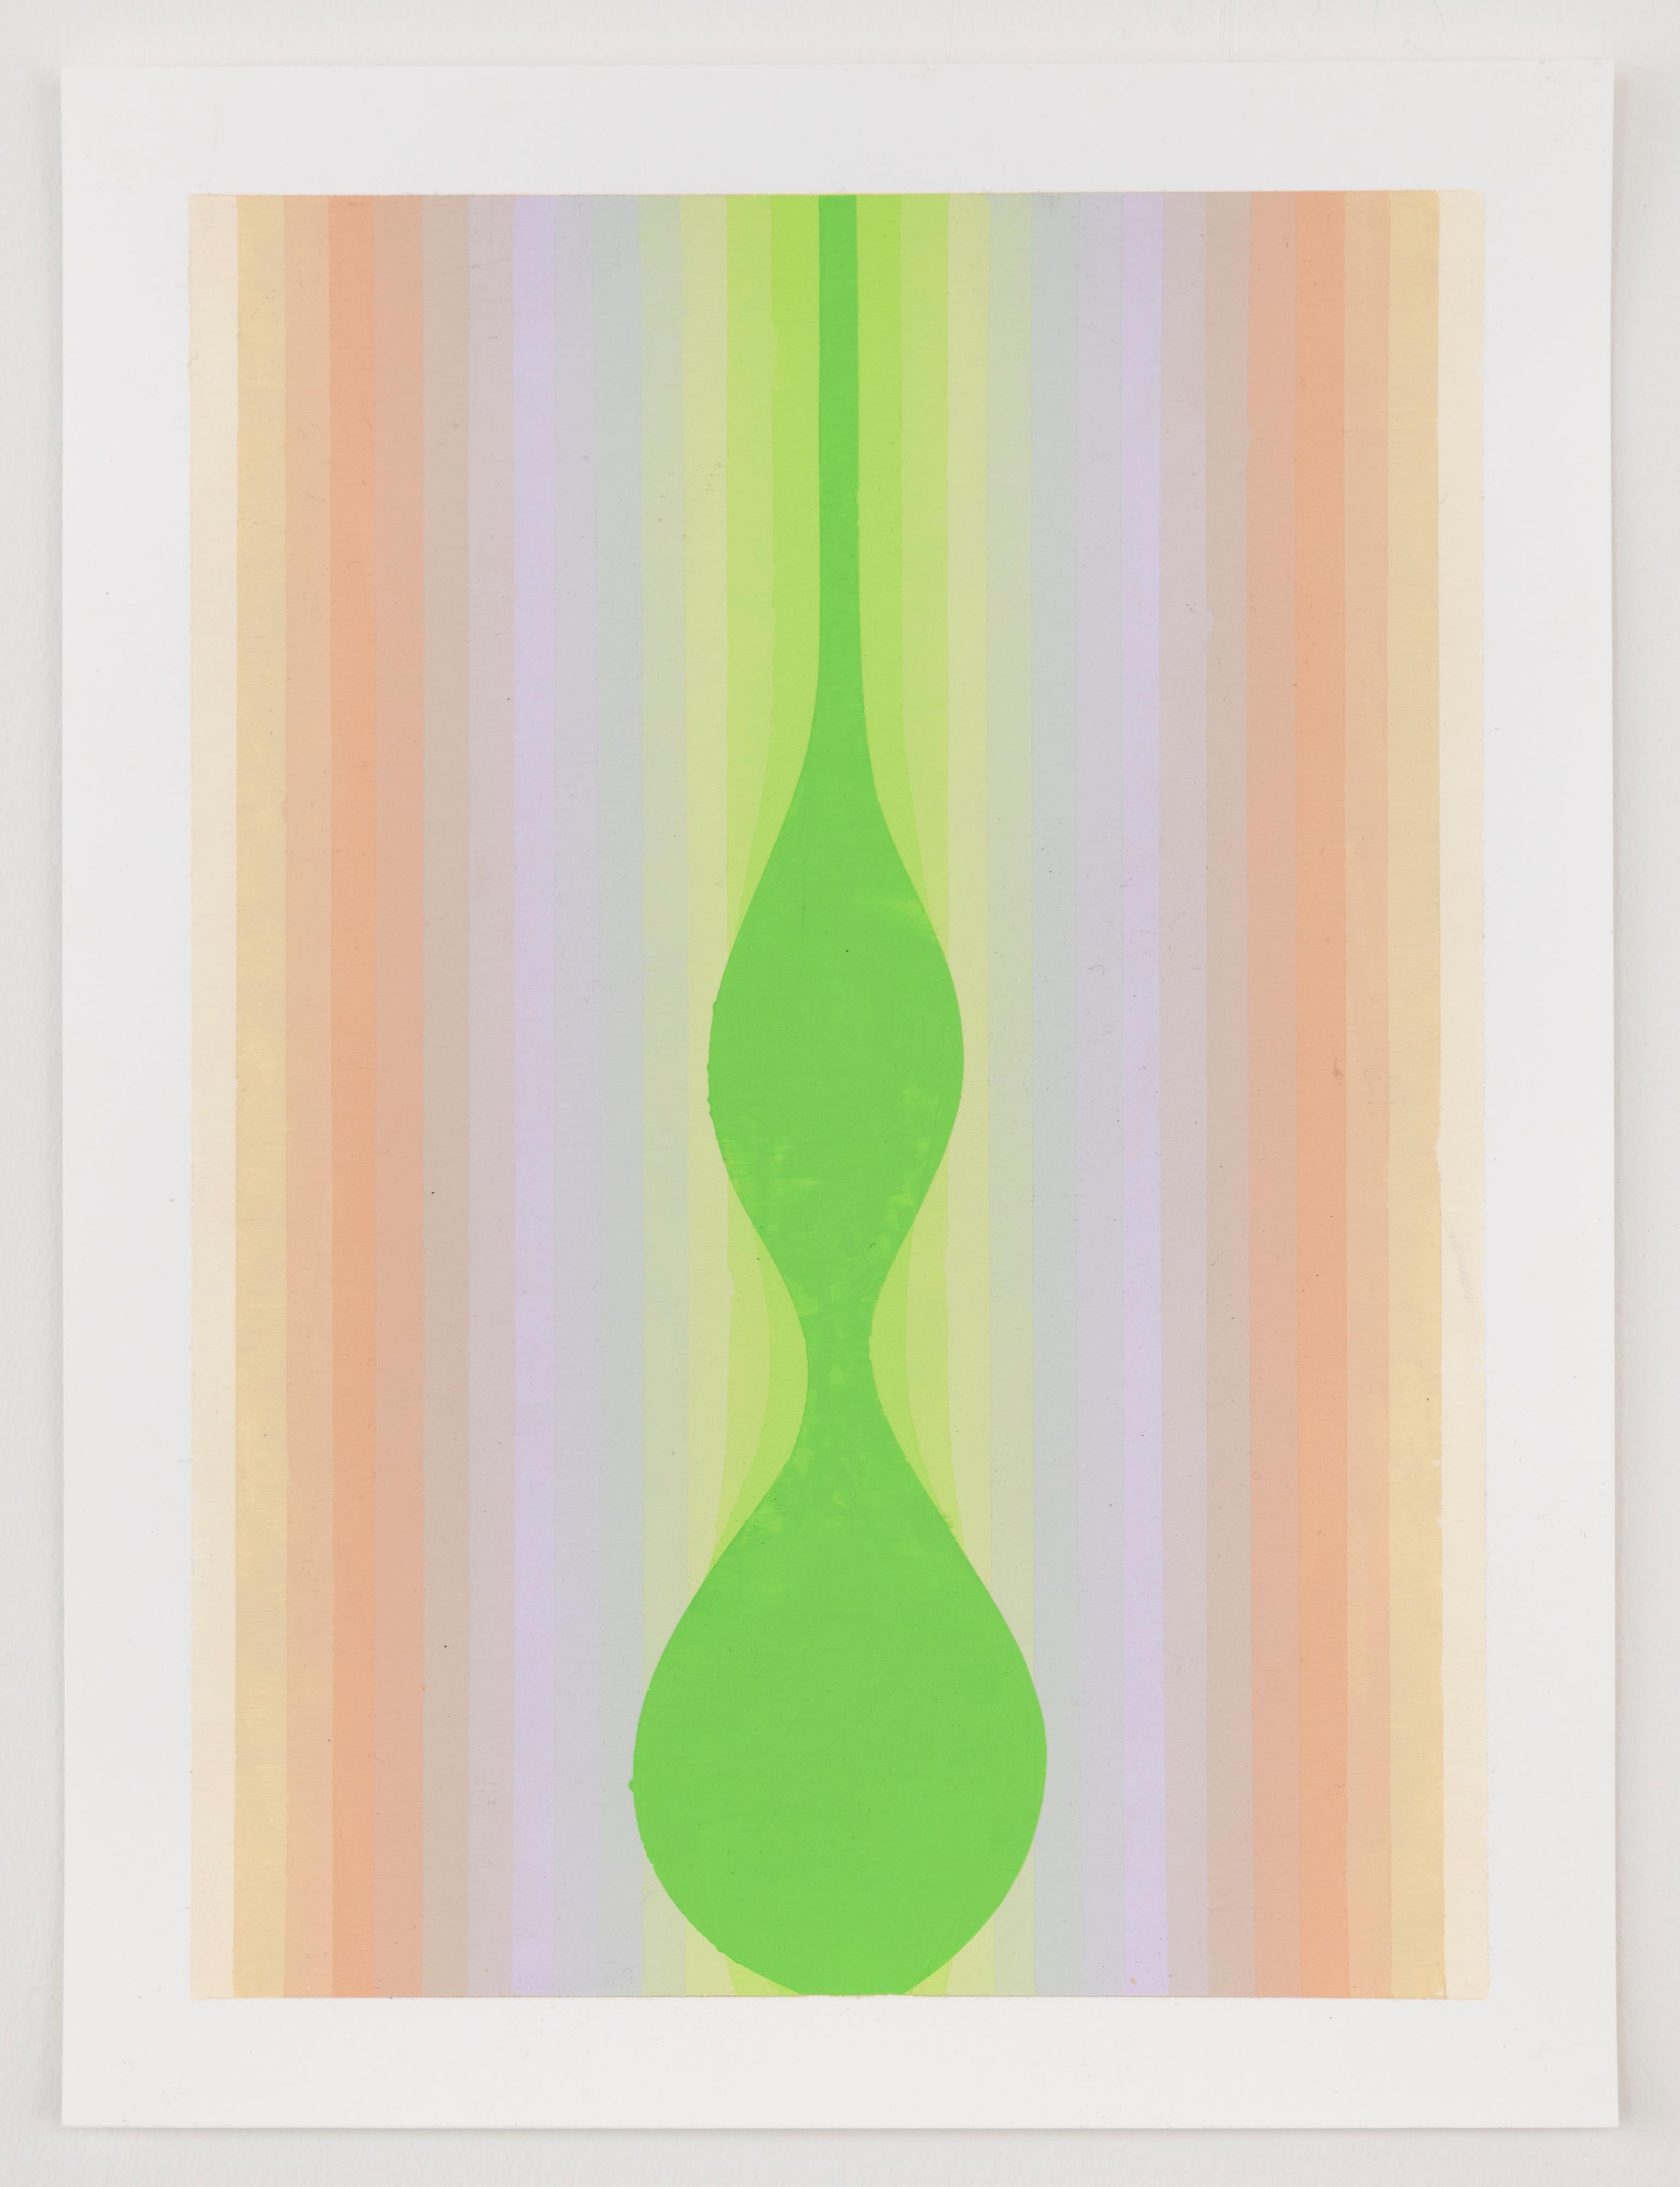 Audrey Stone, Study for Center Flow, 2018, Color Field, Abstraction